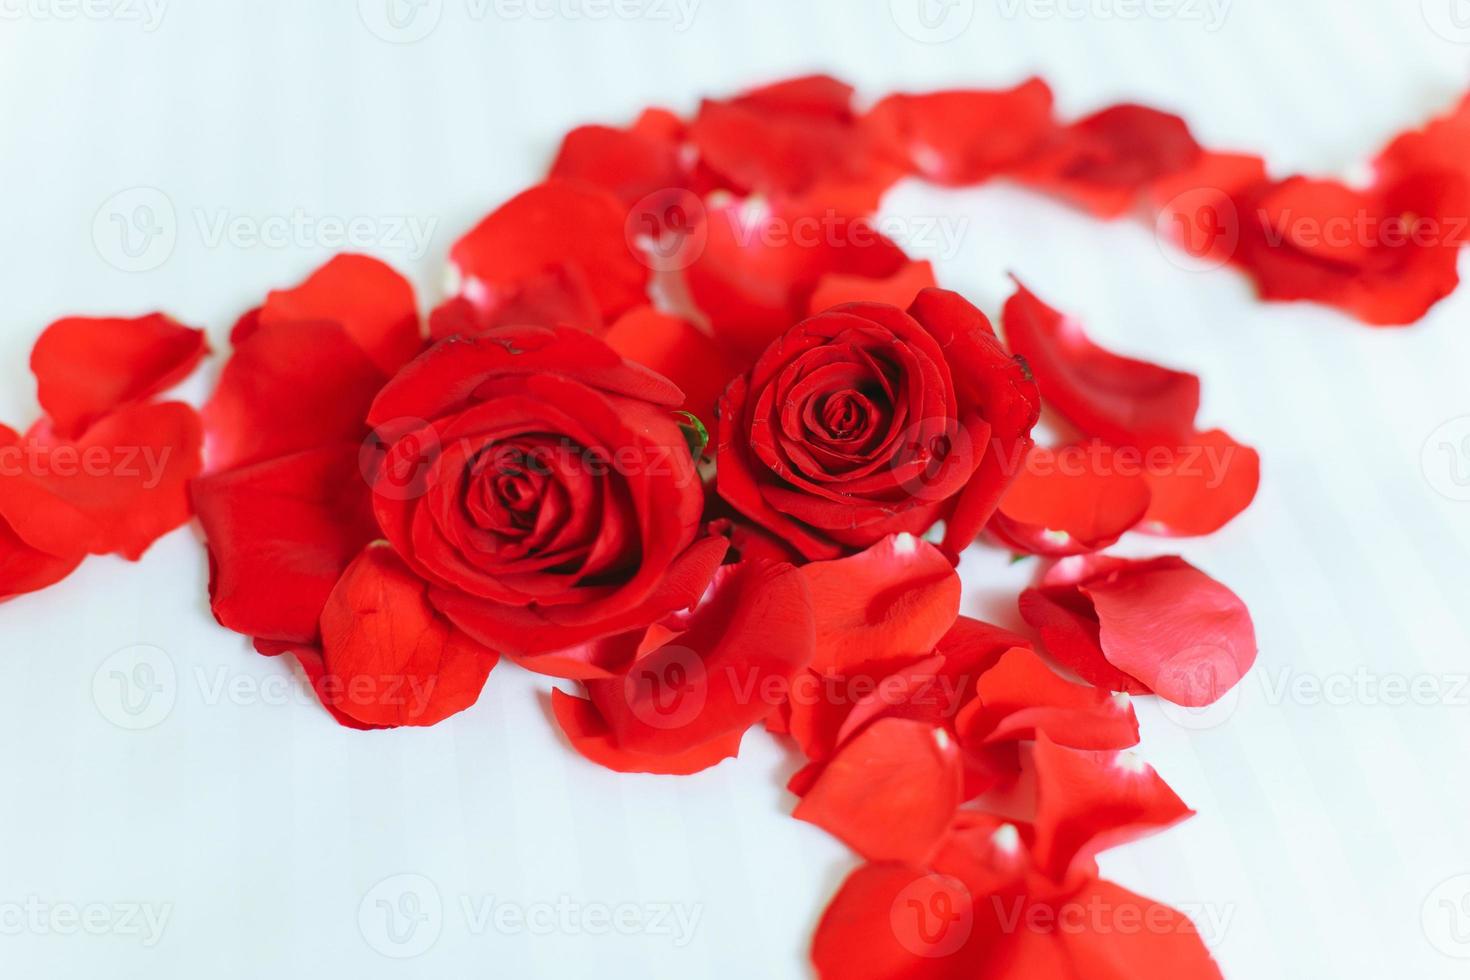 two red roses with rose petals in white background photo